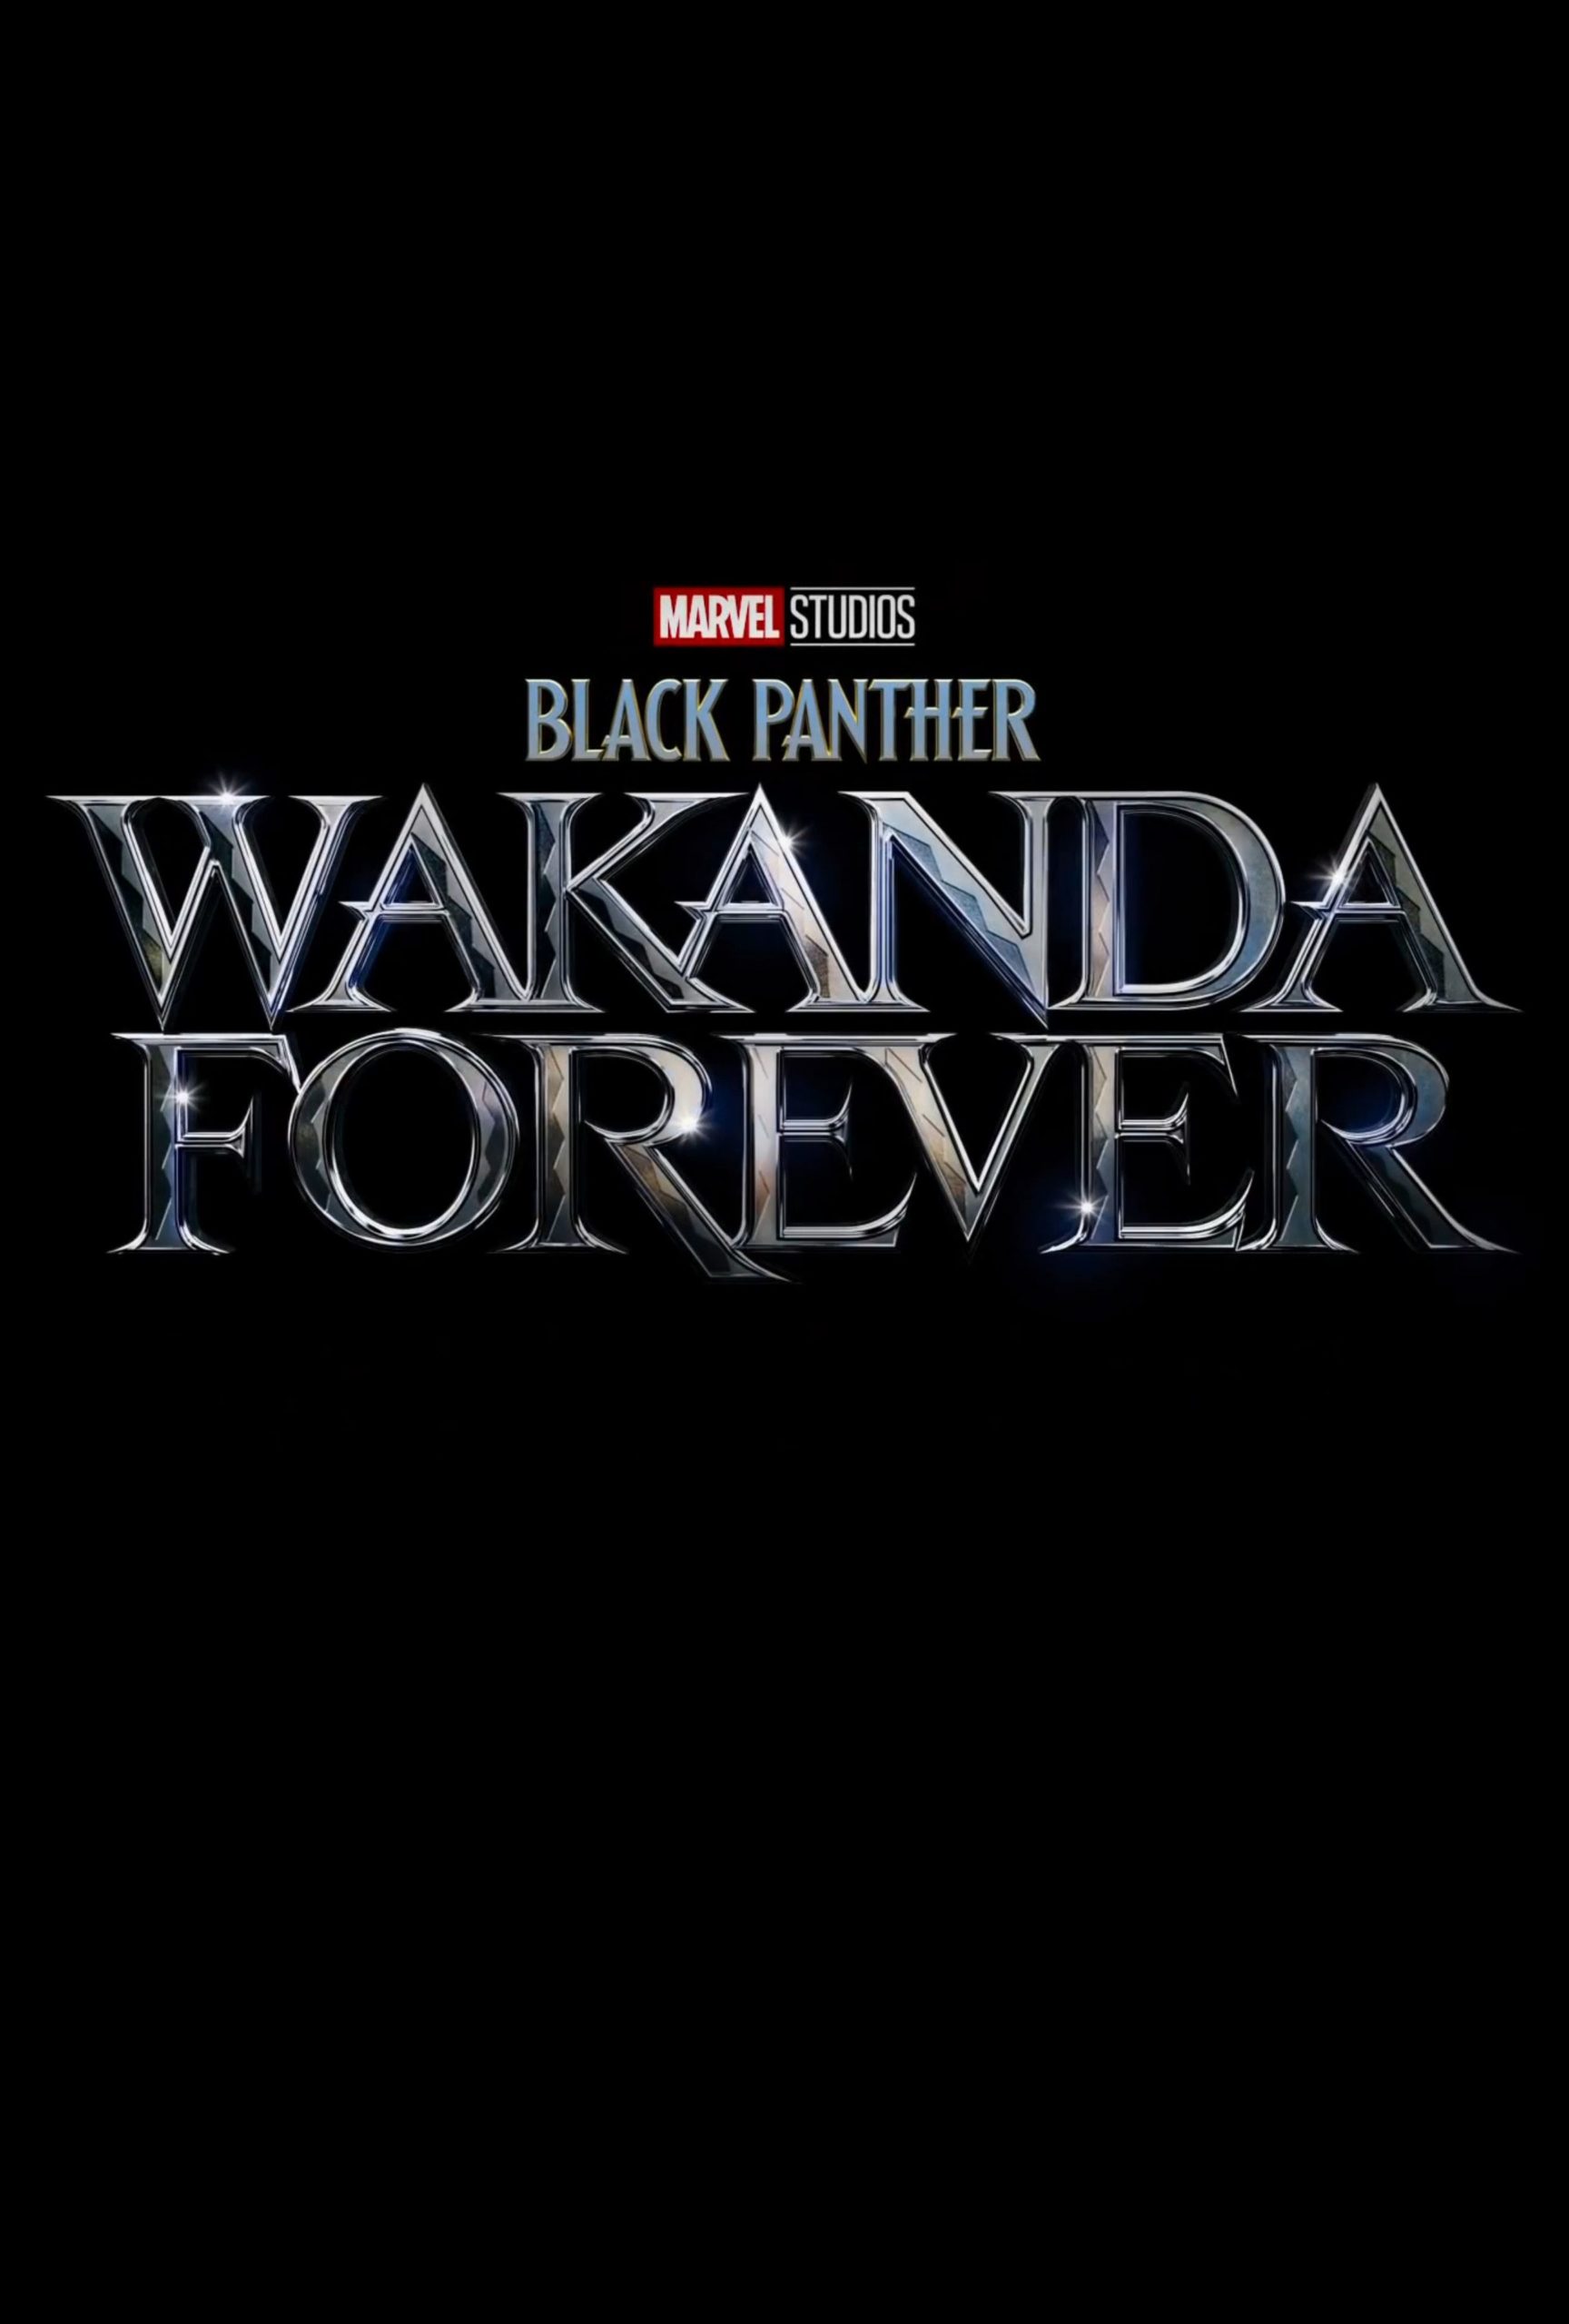 Black Panther: Wakanda Forever Rumor Shows How Marvel Classic Character Could Be Introduced